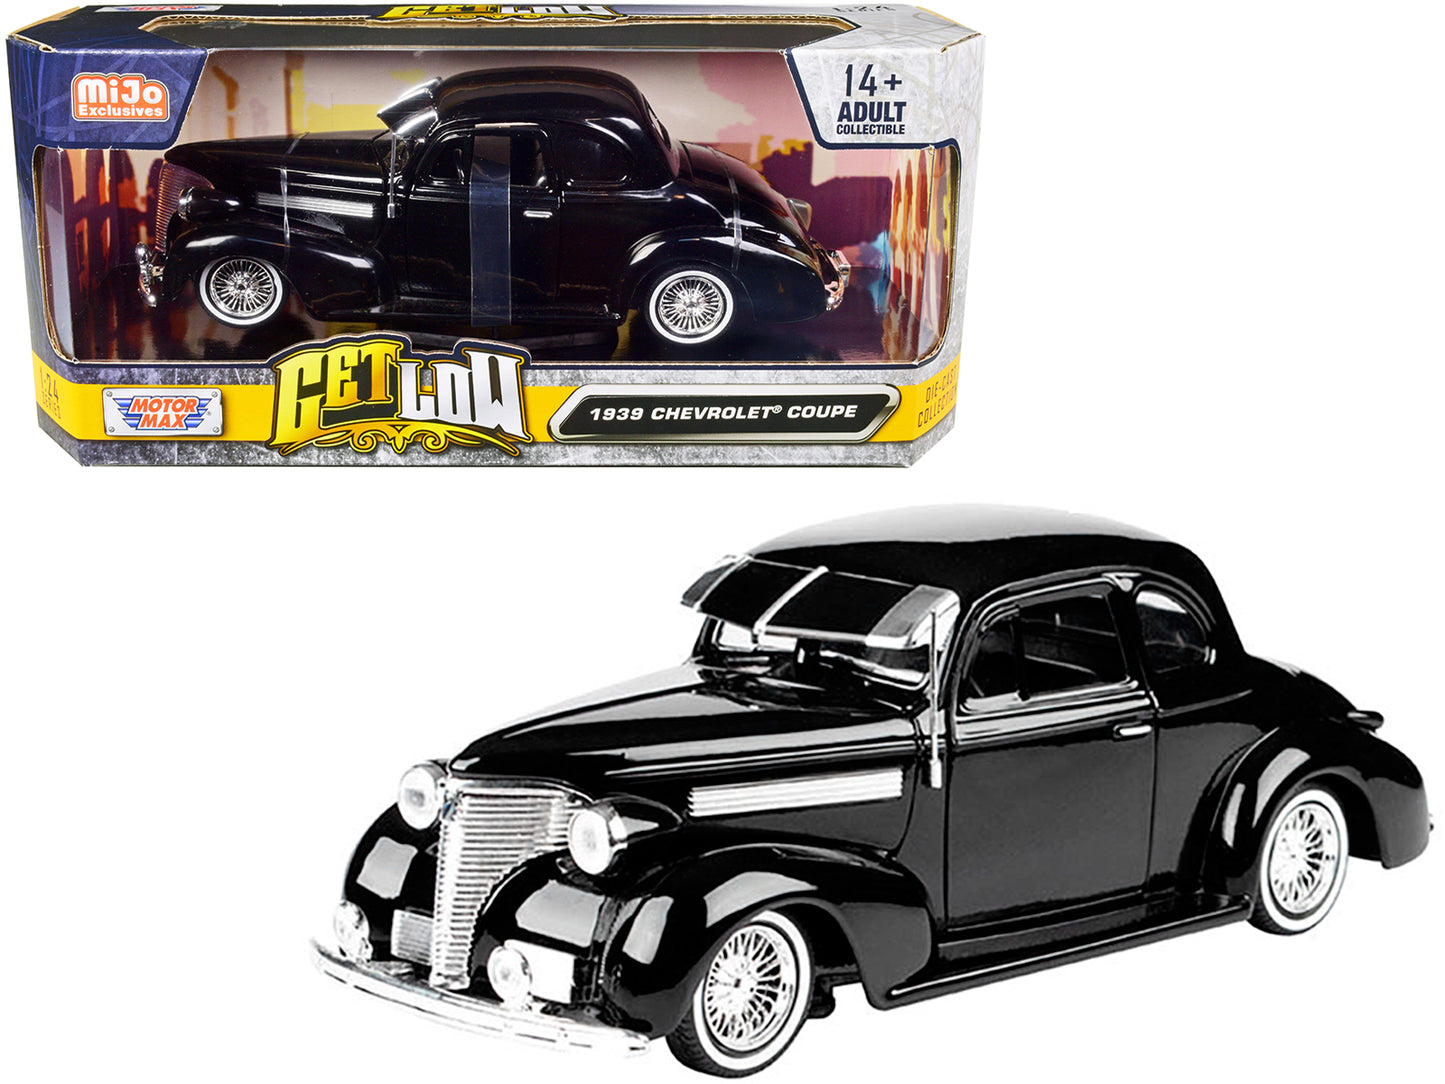 1939 Chevrolet Coupe Lowrider Black Diecast Model Car Lowriders